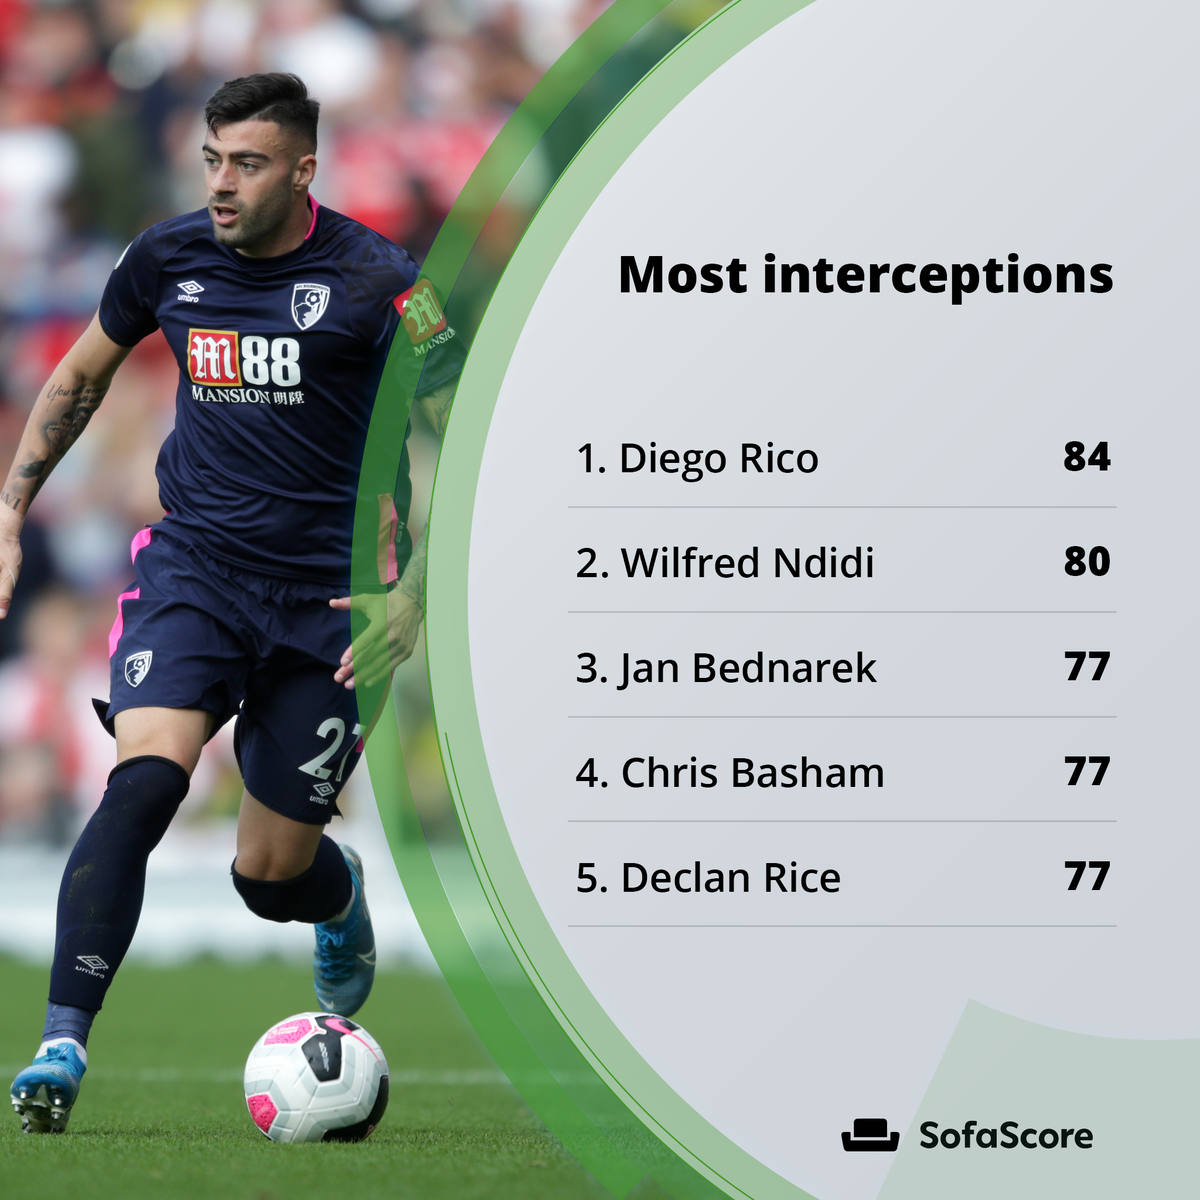 Premier League players dominate the two defensive categories, with full-backs Diego Rico and Aaron Wan-Bissaka making the most interceptions and tackles respectively.We have to mention Rennes' 17-year-old Eduardo Camavinga, who made 105 tackles despite playing just 25 matches!